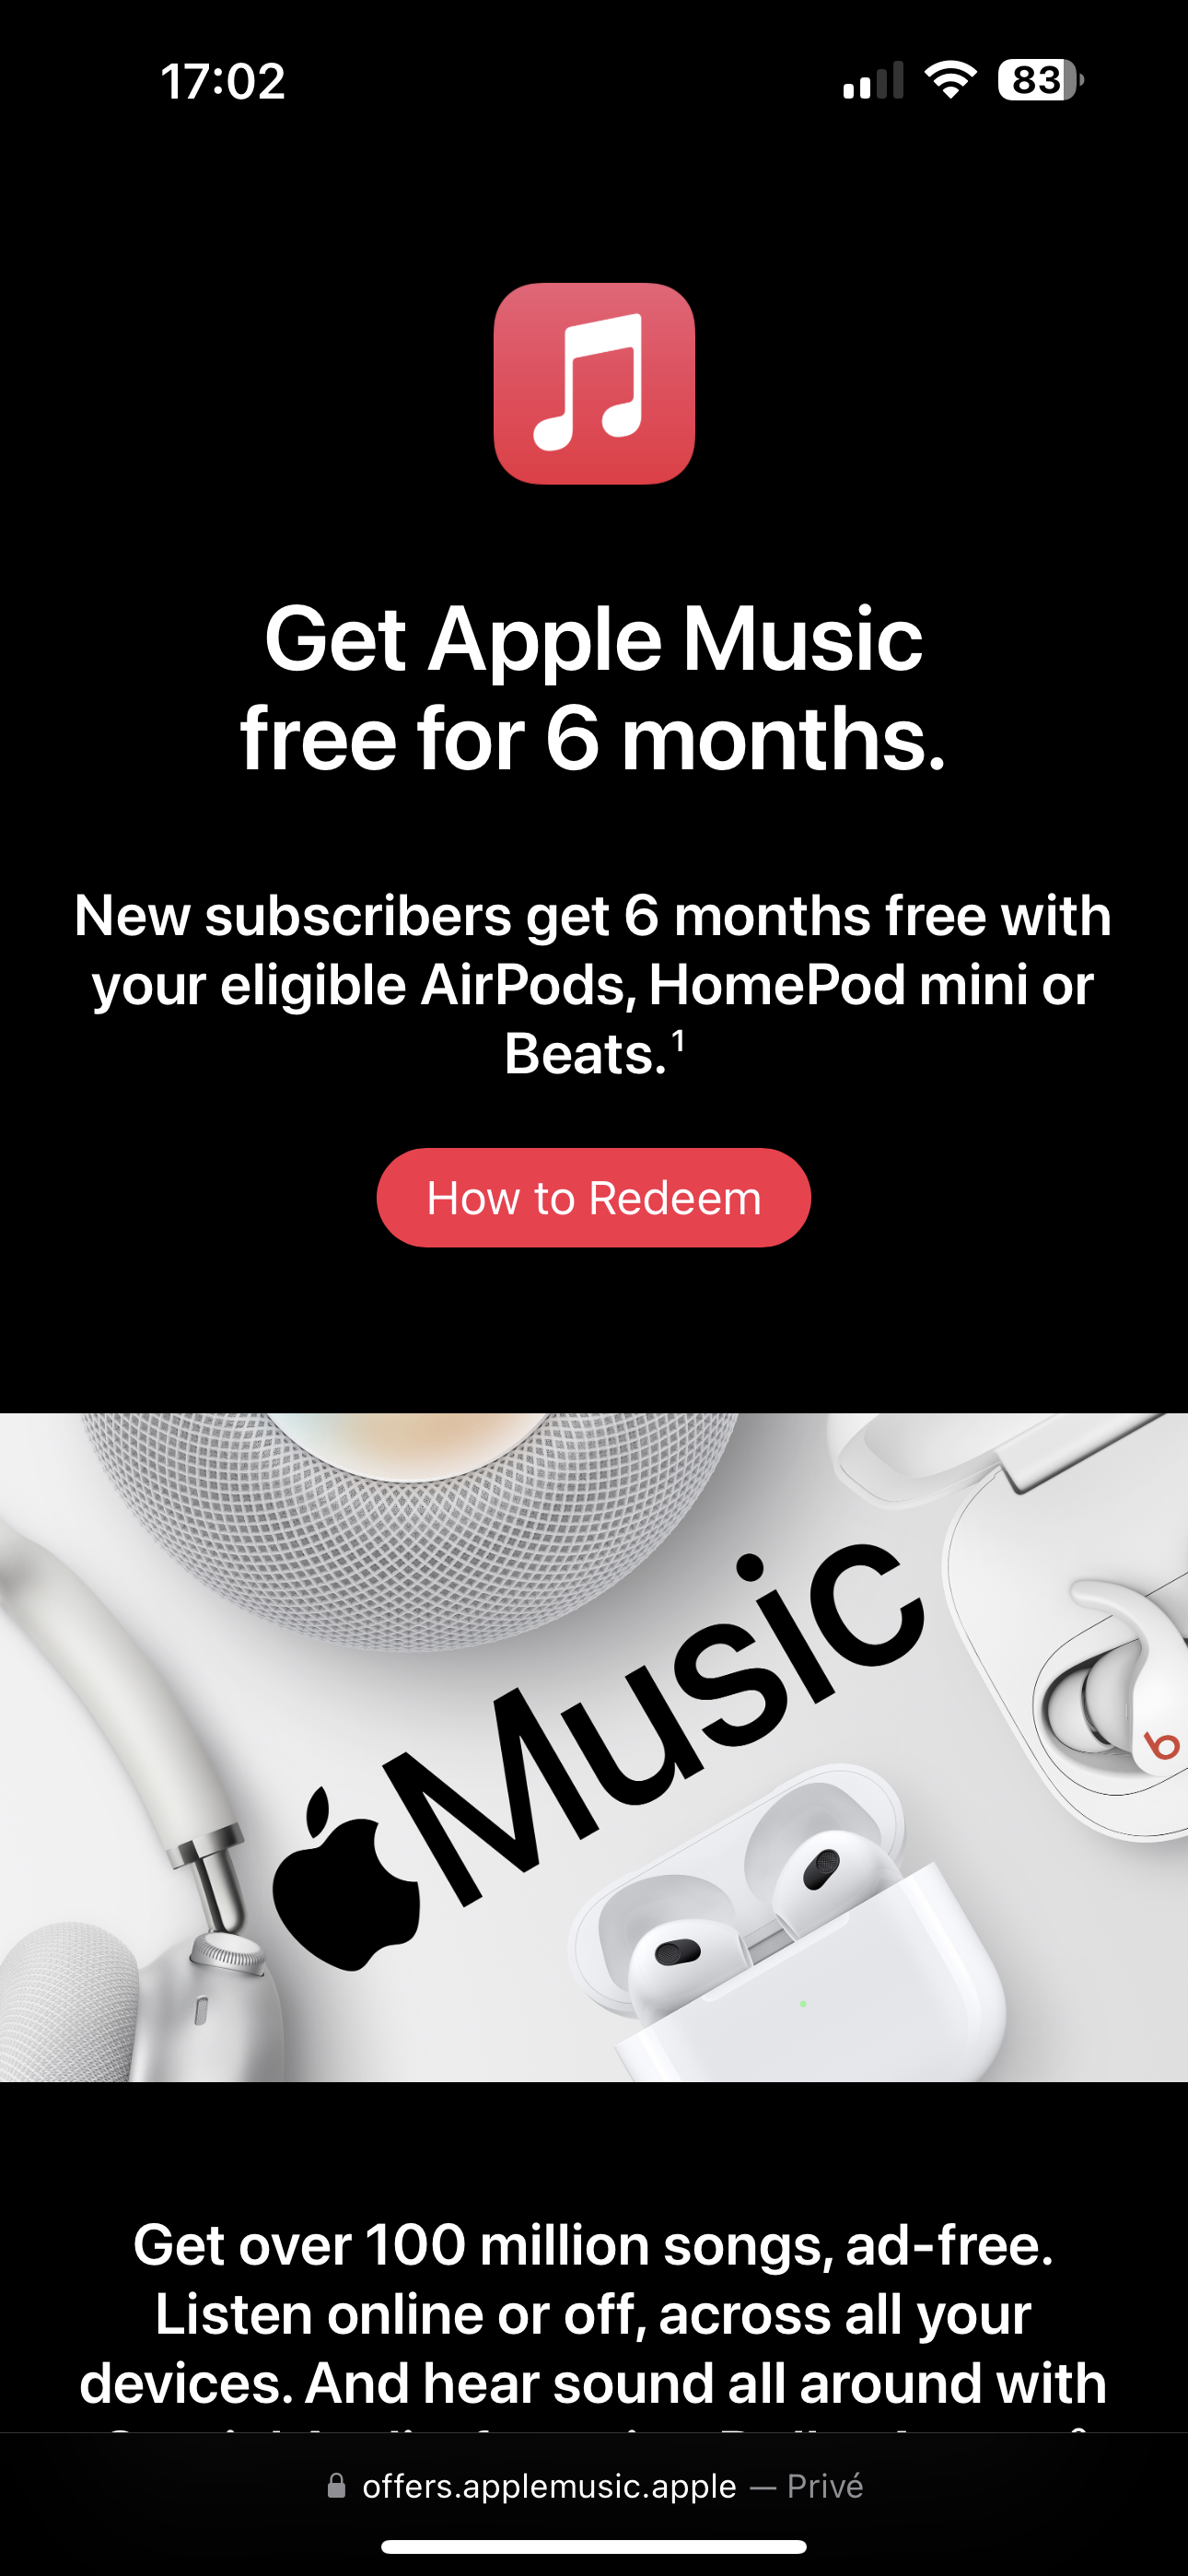 Get Apple Music free for 6 months. Apple Community